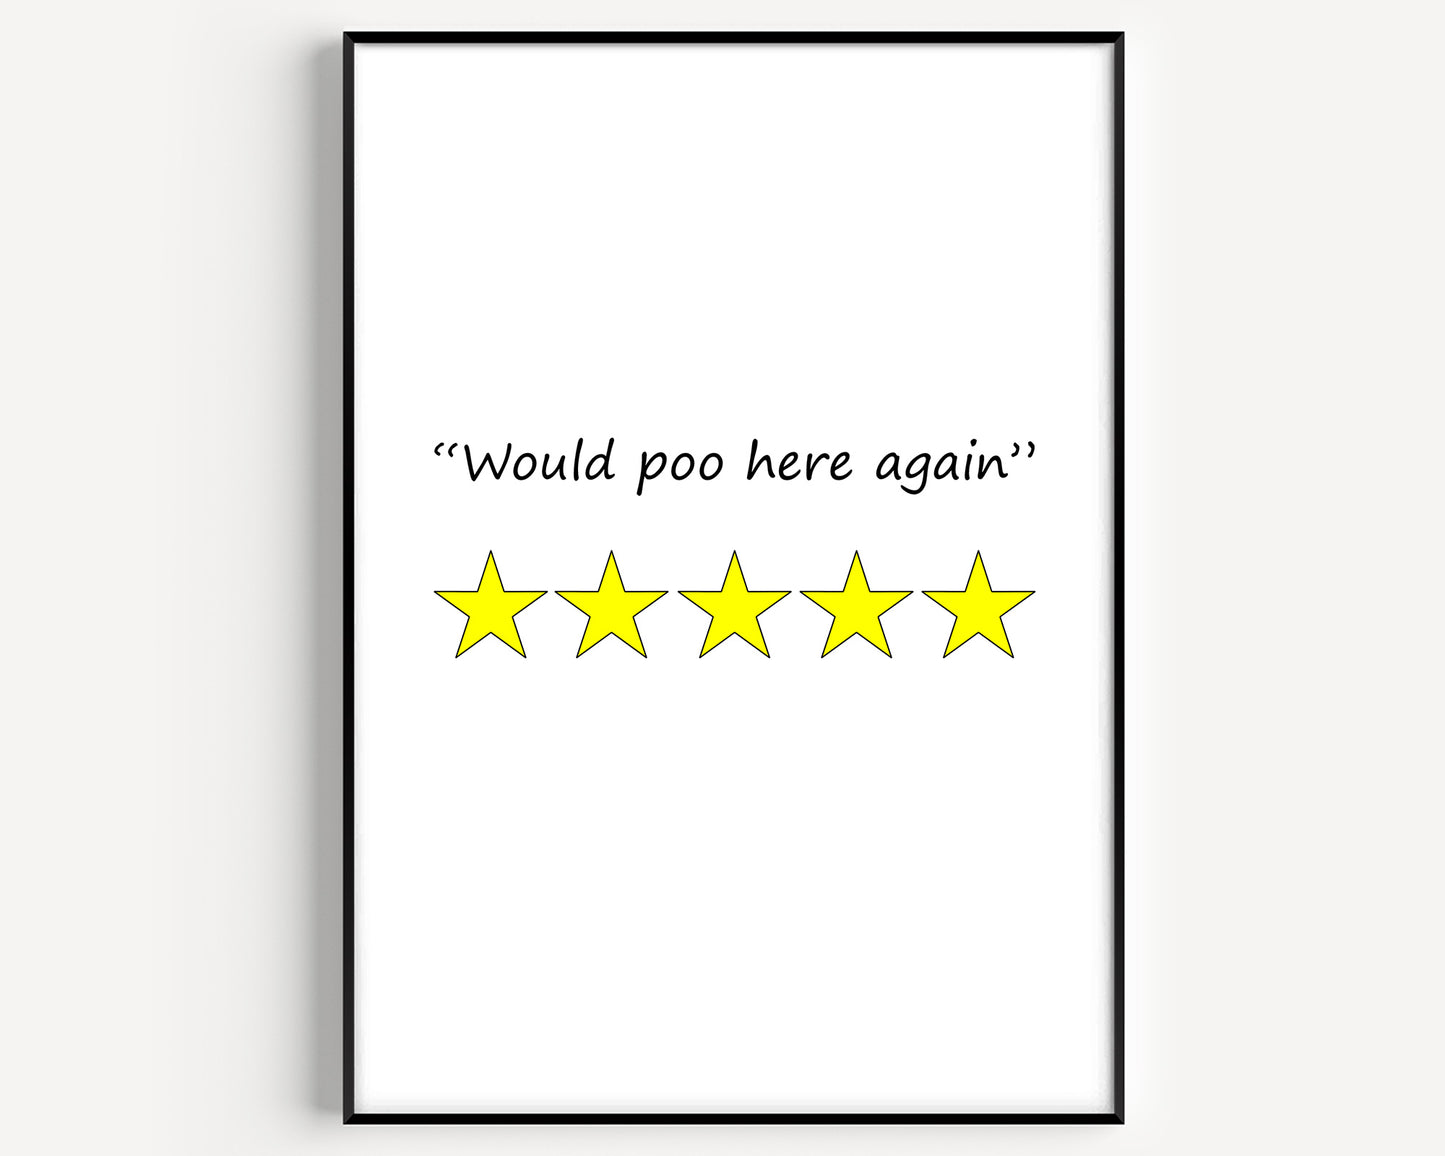 Would Poo Here Again 5 Stars Funny Toilet Review Print - Magic Posters